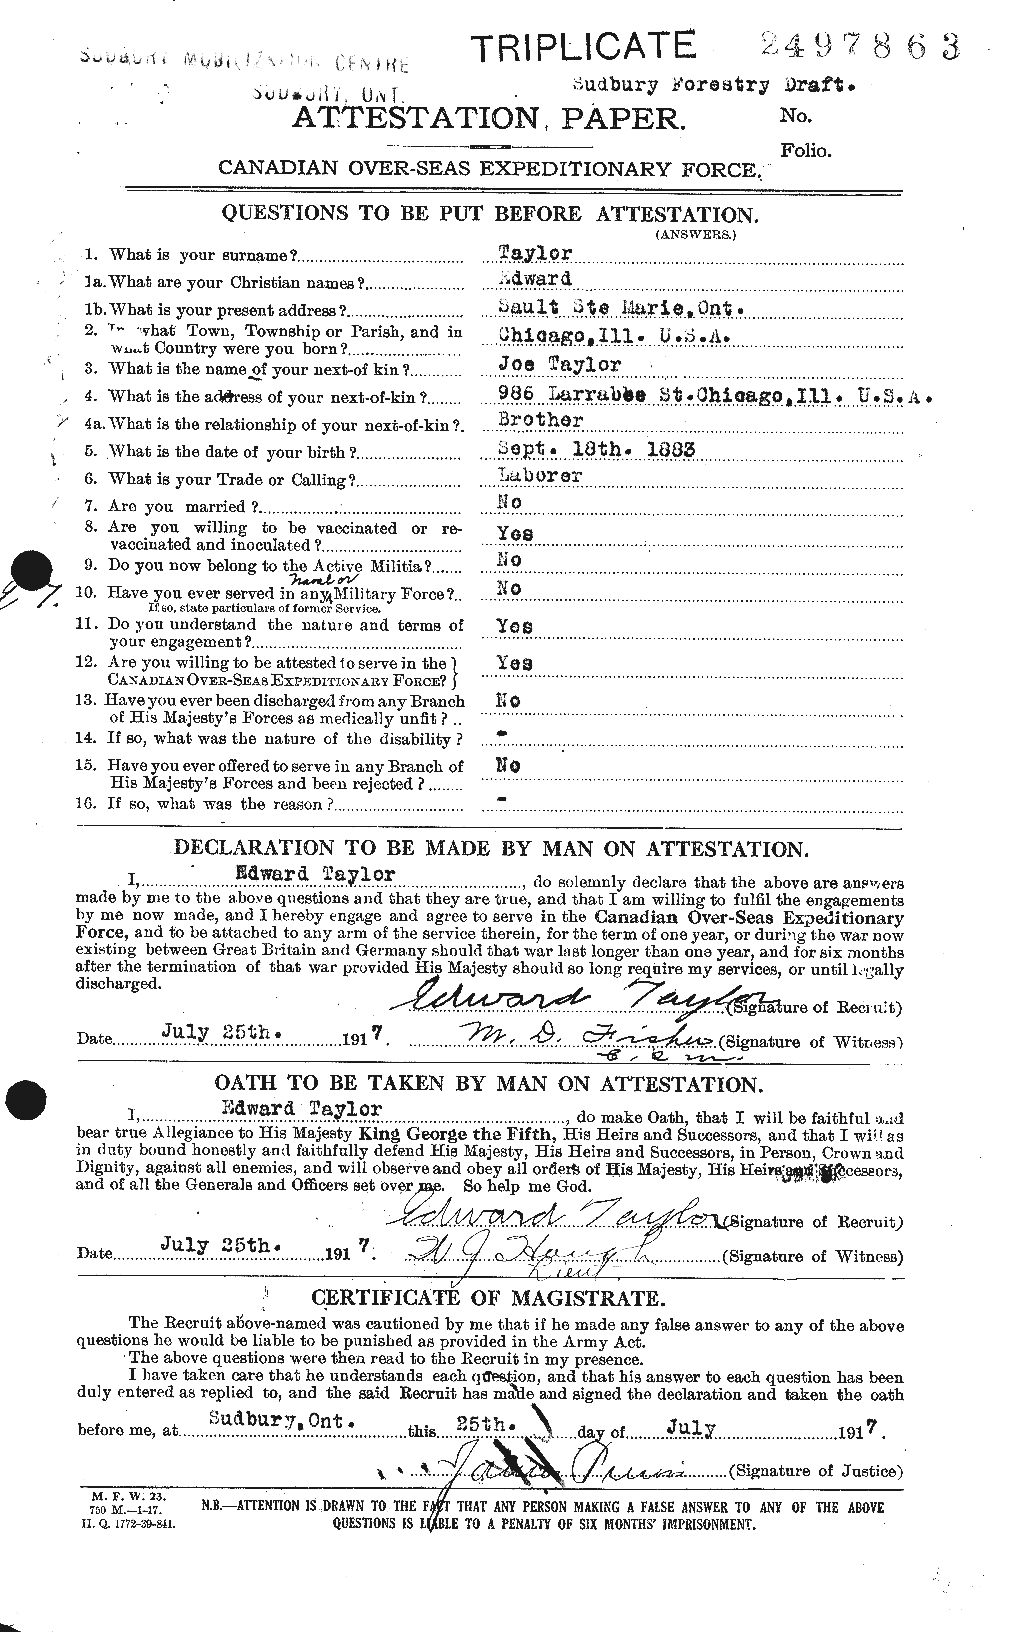 Personnel Records of the First World War - CEF 627289a